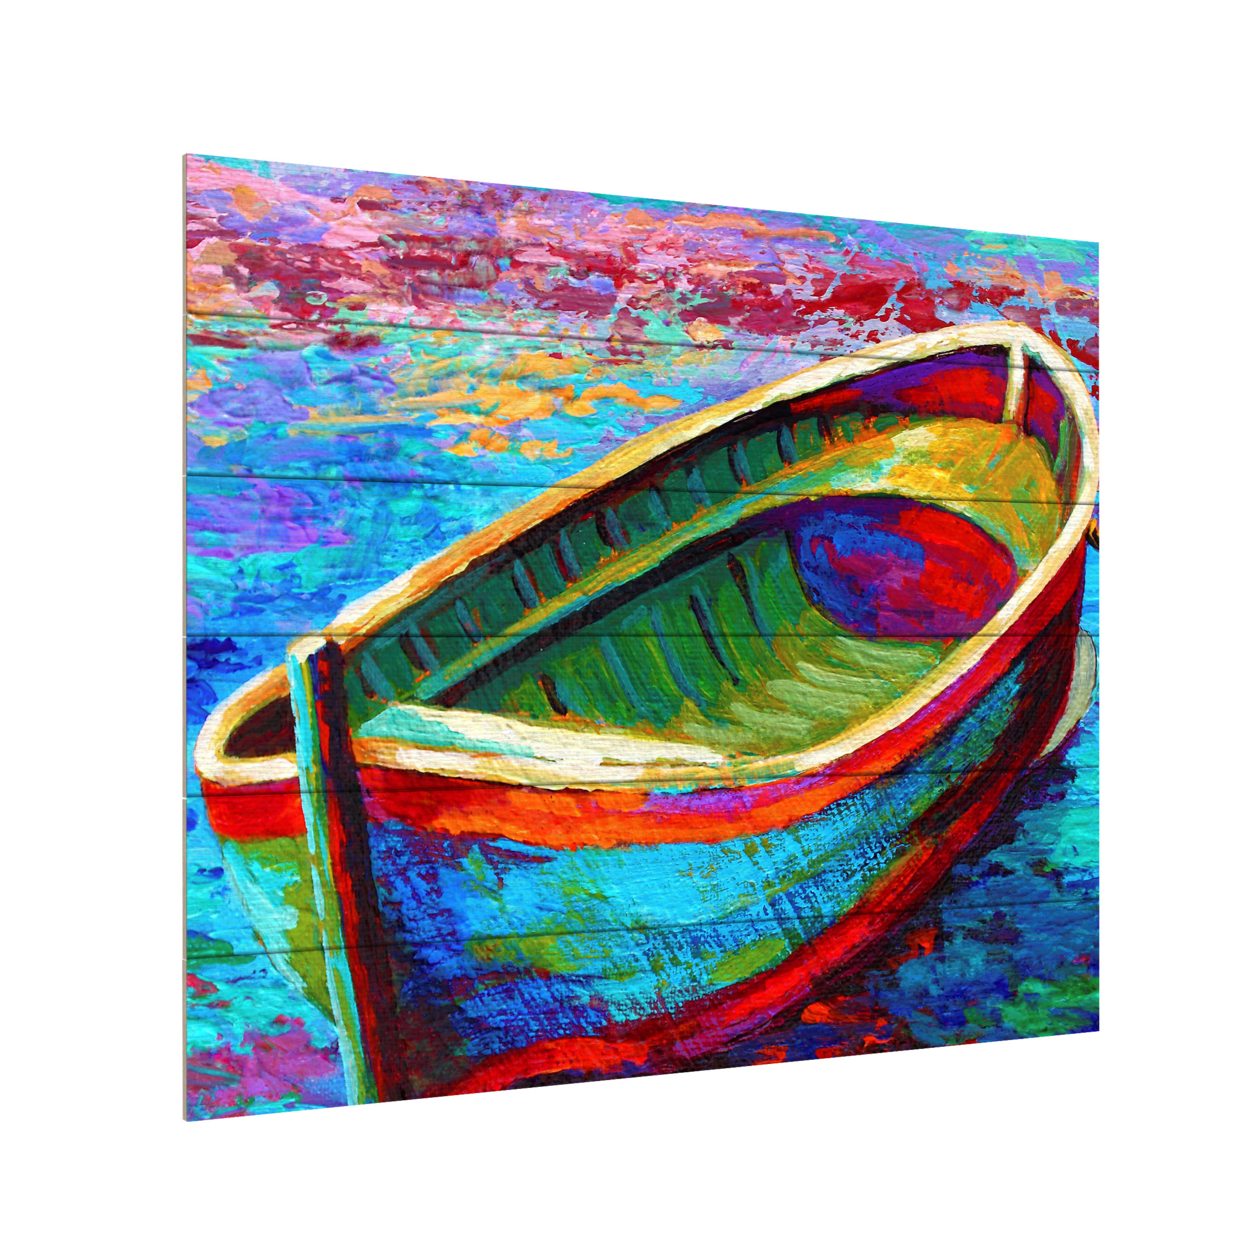 Wooden Slat Art 18 X 22 Inches Titled Boat 9 Ready To Hang Home Decor Picture